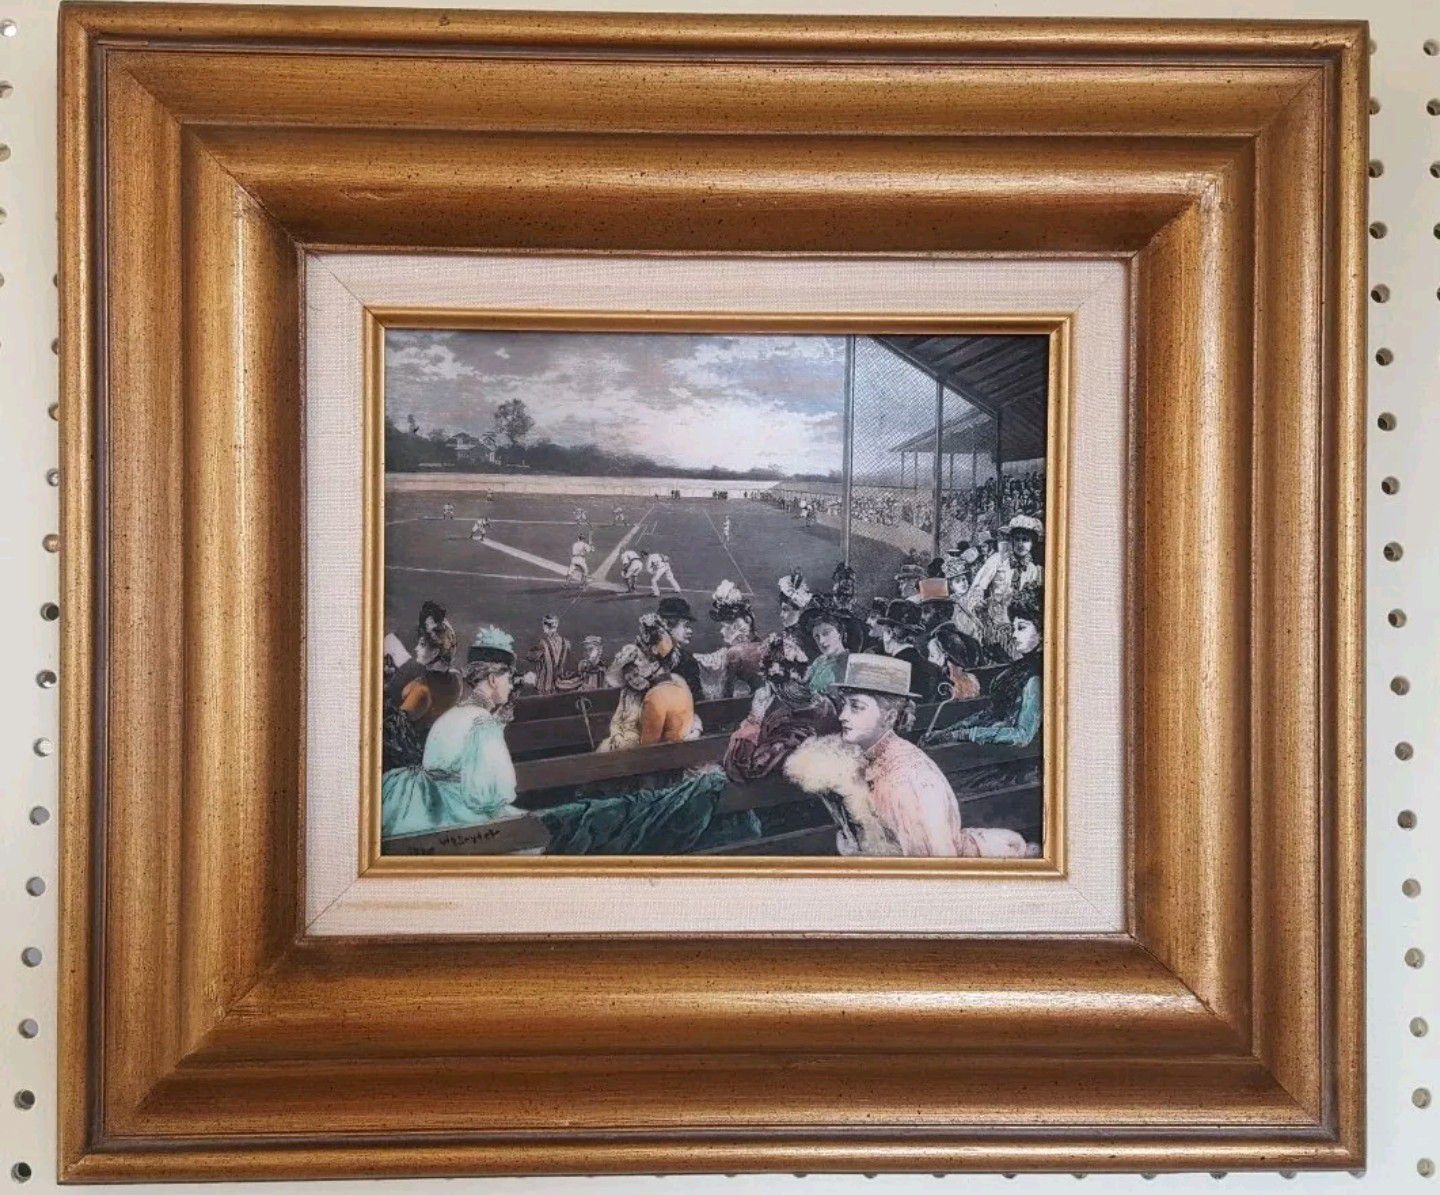 1888 Etched Resin "A Collegiate Game Of Baseball" W.P. Snyder Framed painting